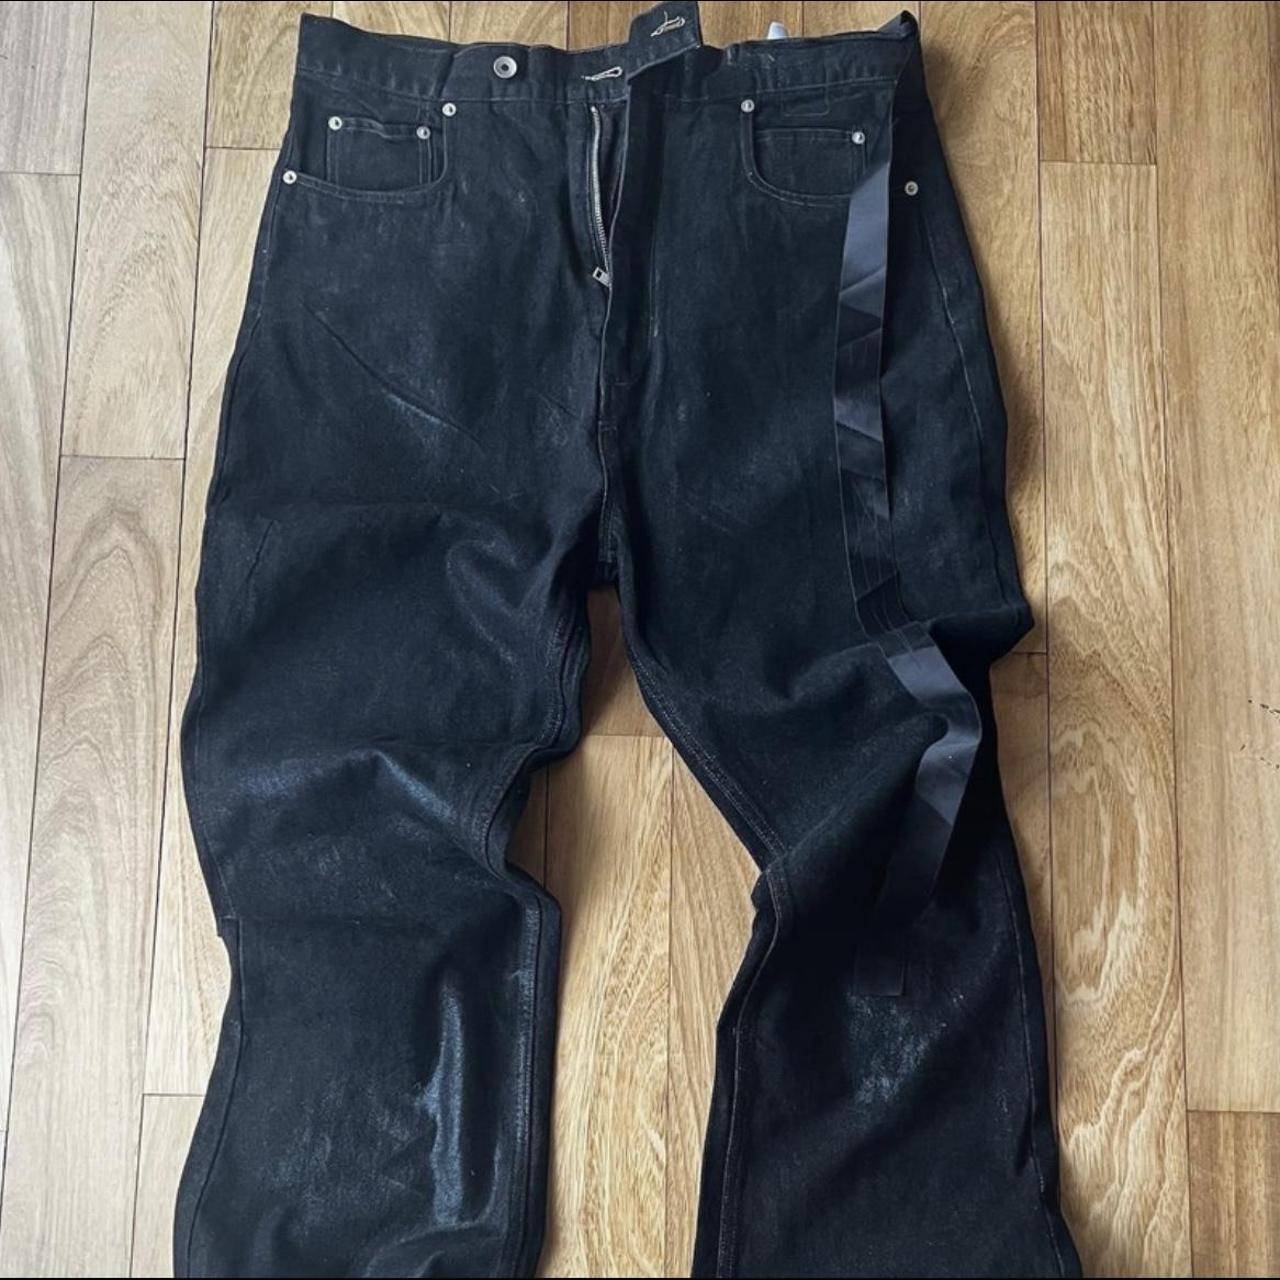 Rick Owens Bolan Bootcut jeans size 30 like new 400€ - Depop